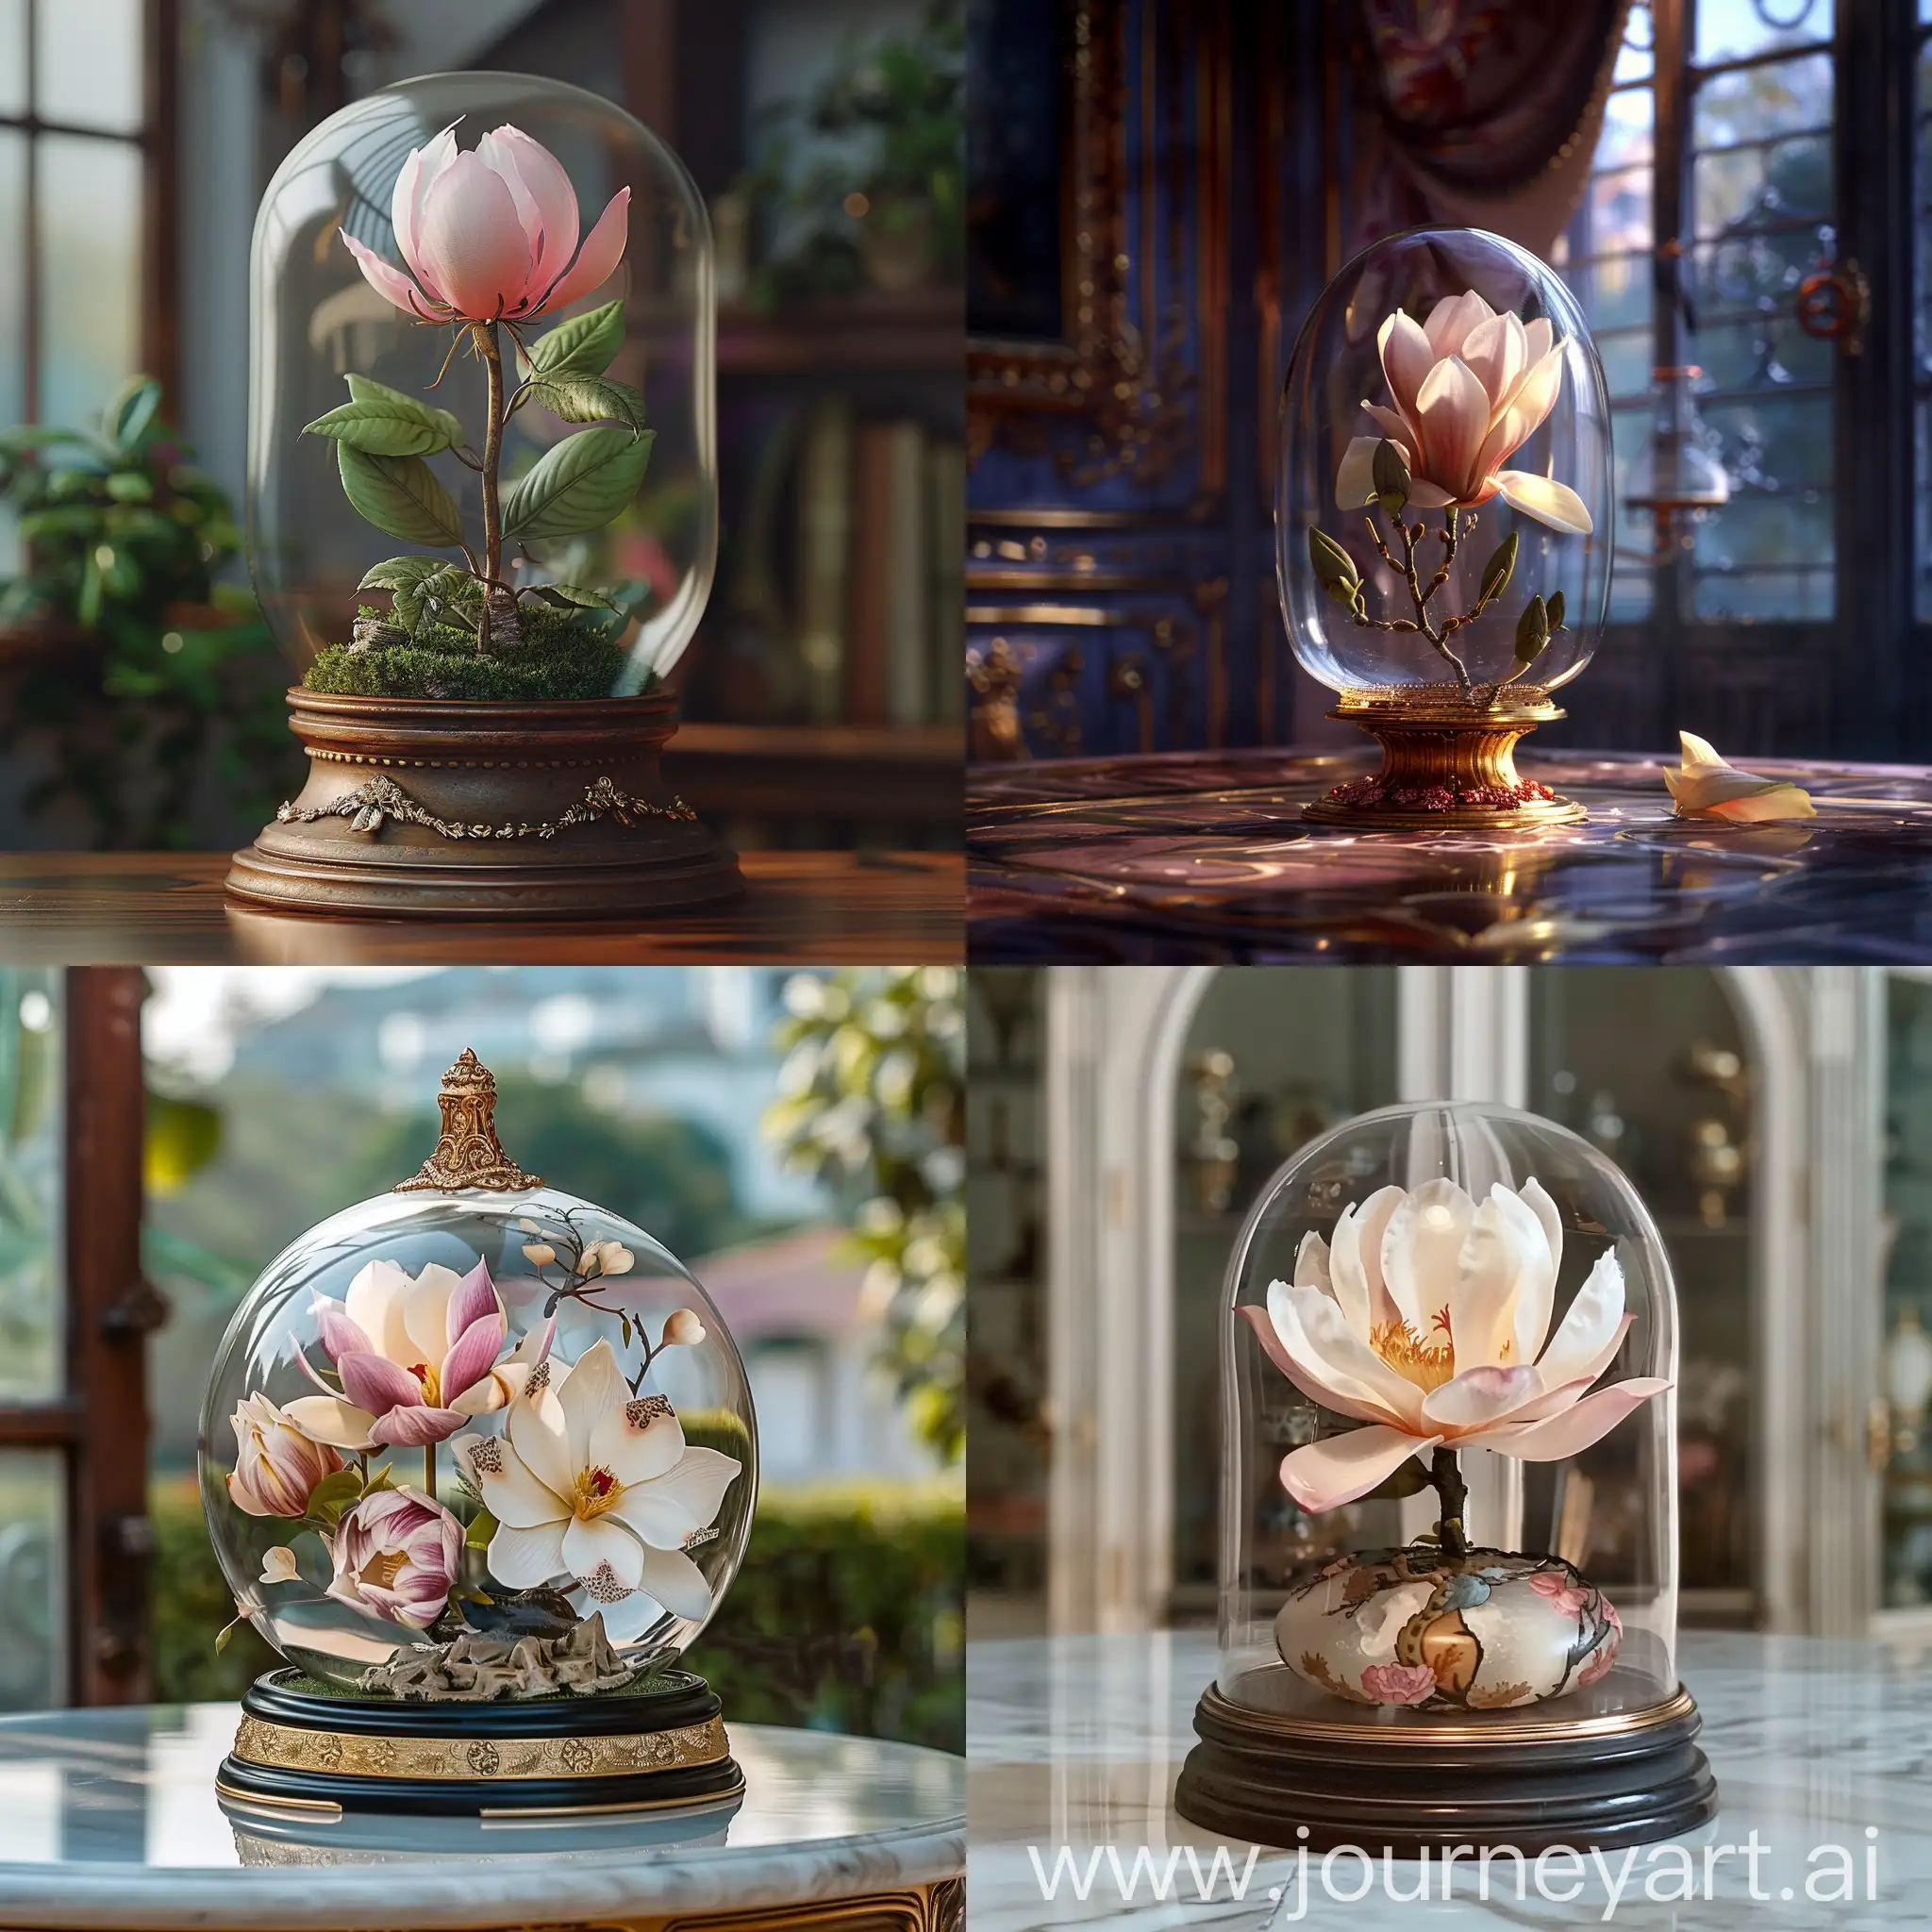 Real and very eye-catching photo of a very beautiful and attractive flower grown in a dome-shaped glass (medium glass size) with a beautiful base, the flower inside the glass is a little smaller than the glass, matte background in a beautiful royal house, morning , masterpiece, beauty in every sense, very realistic, many details, professional photography, (real), dreamy, flowers and glass like the movie Devil and Lovely